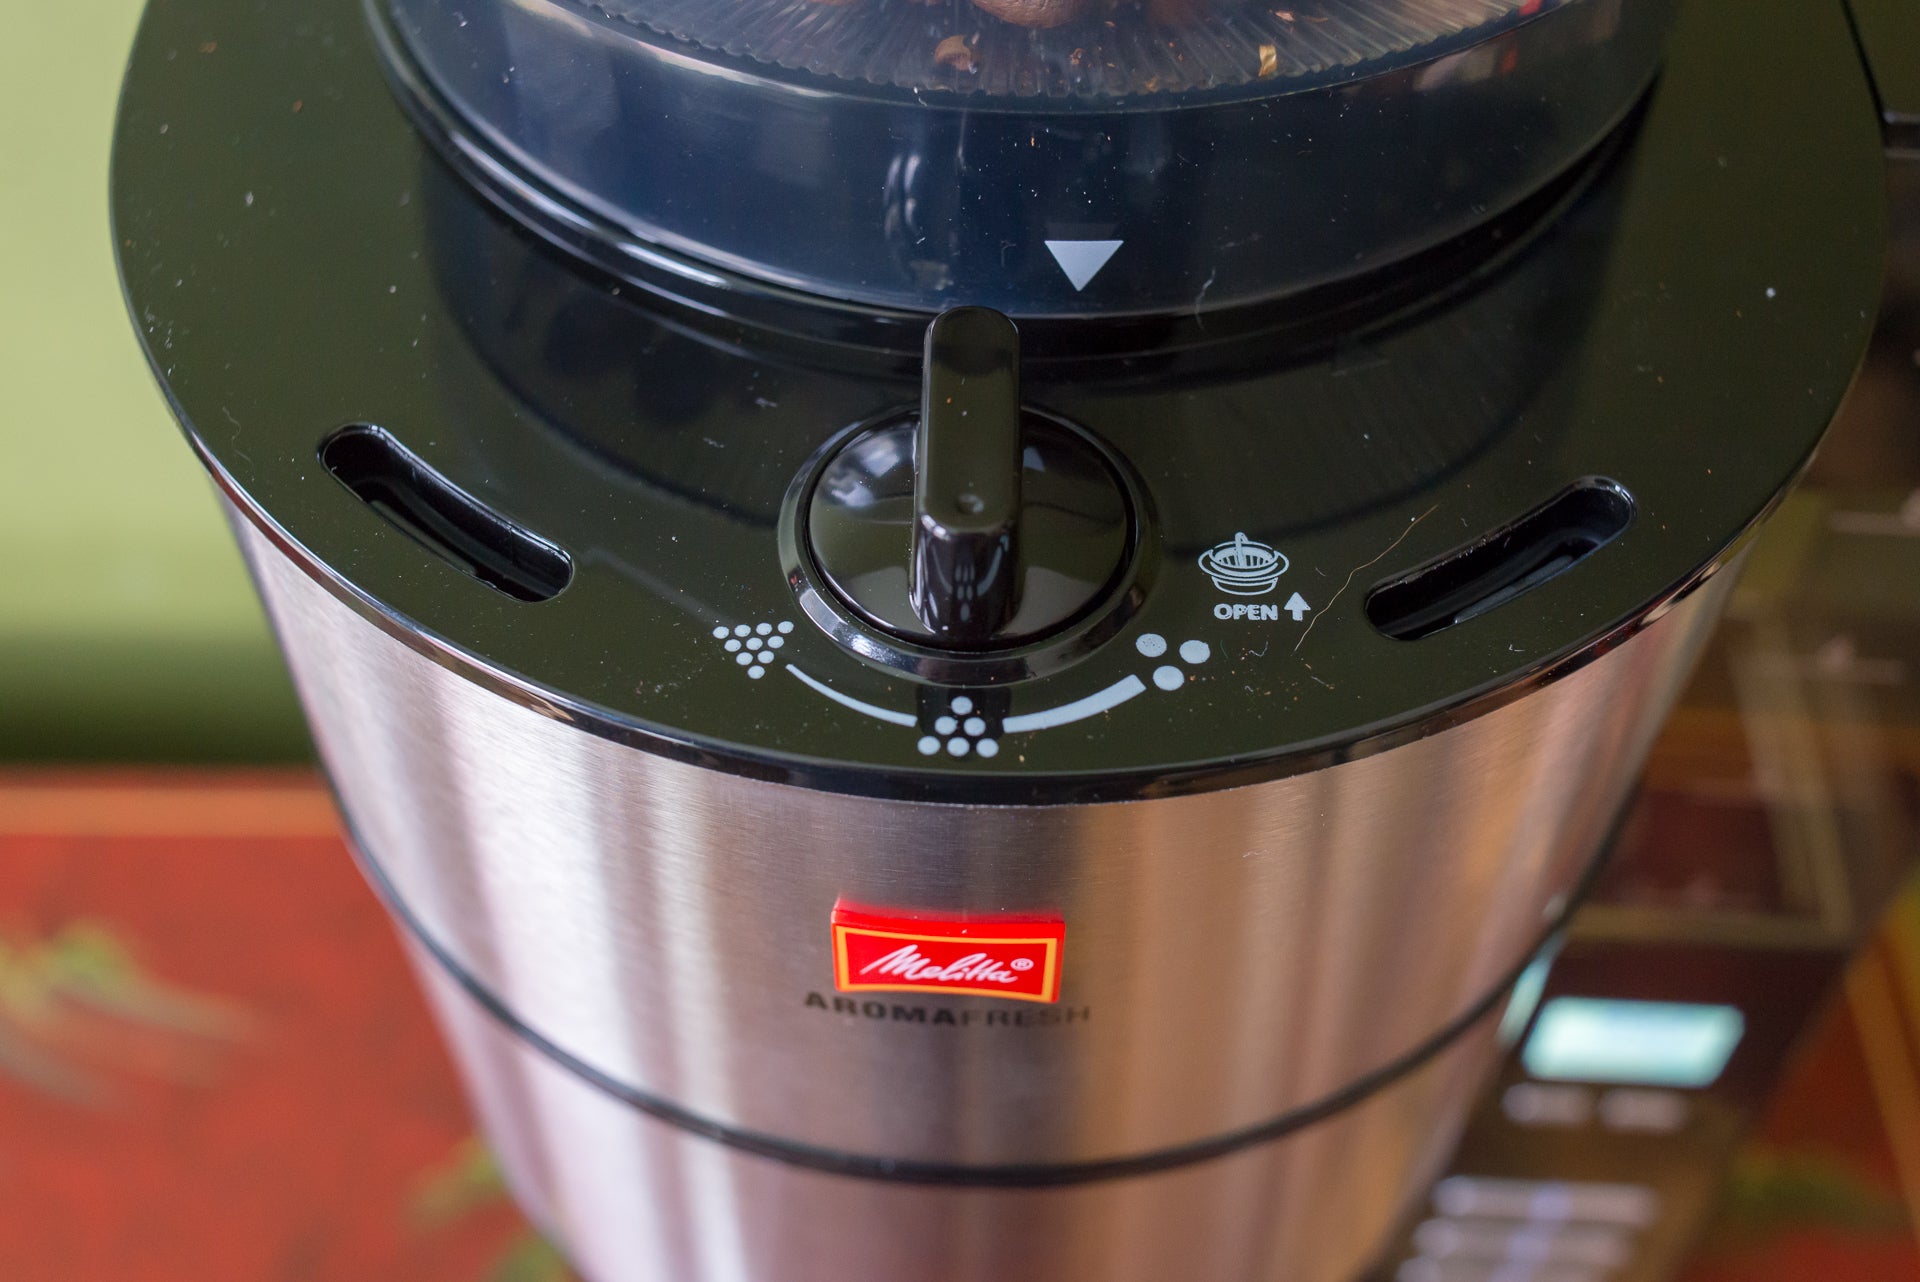 Close-up of Melitta AromaFresh Grind and Brew coffee maker.